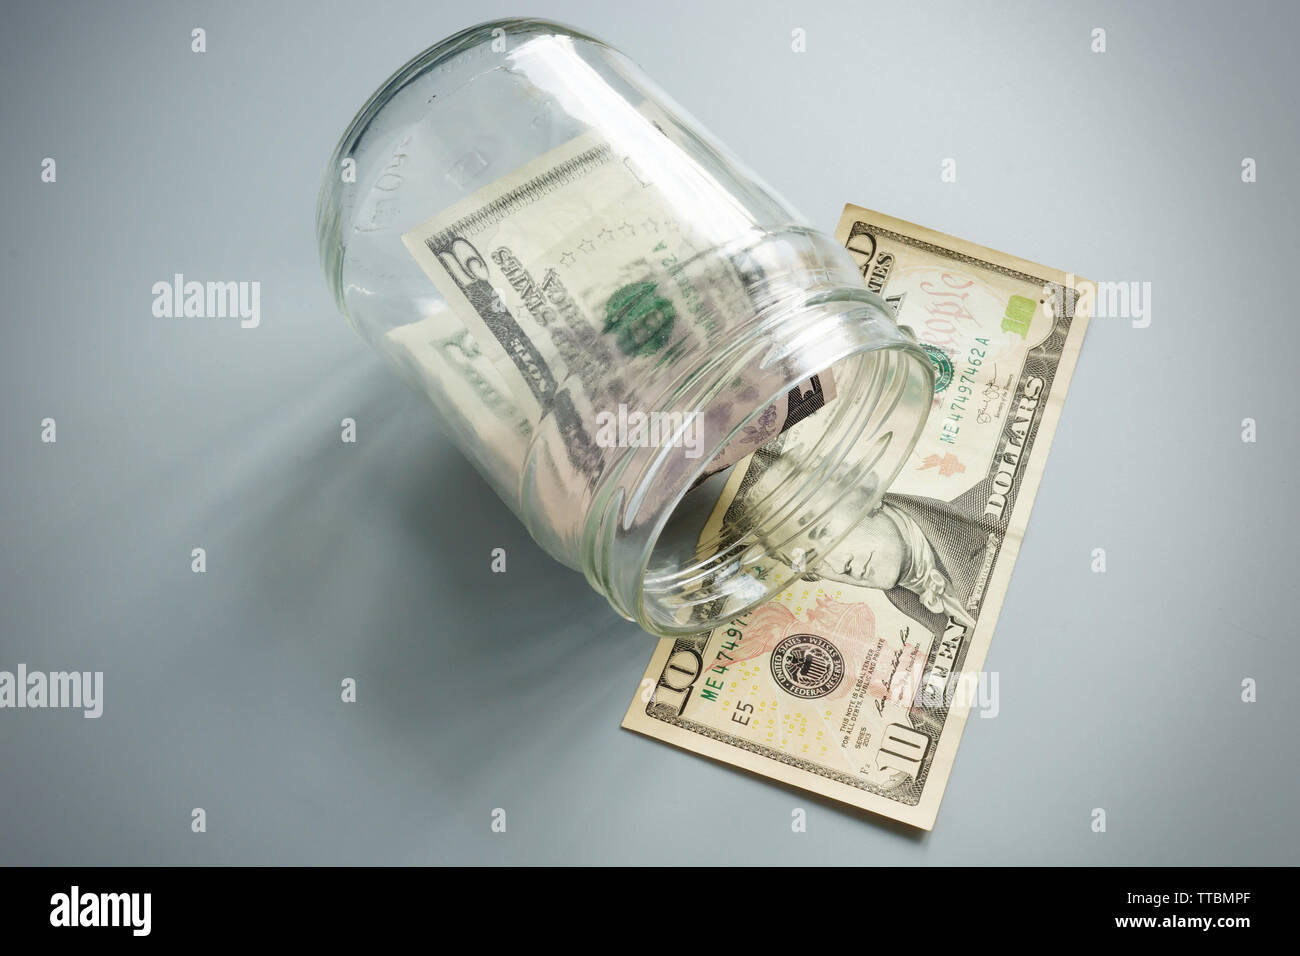 Bankruptcy or insolvency and problems with money. Glass jar with few dollar banknotes. Stock Photo